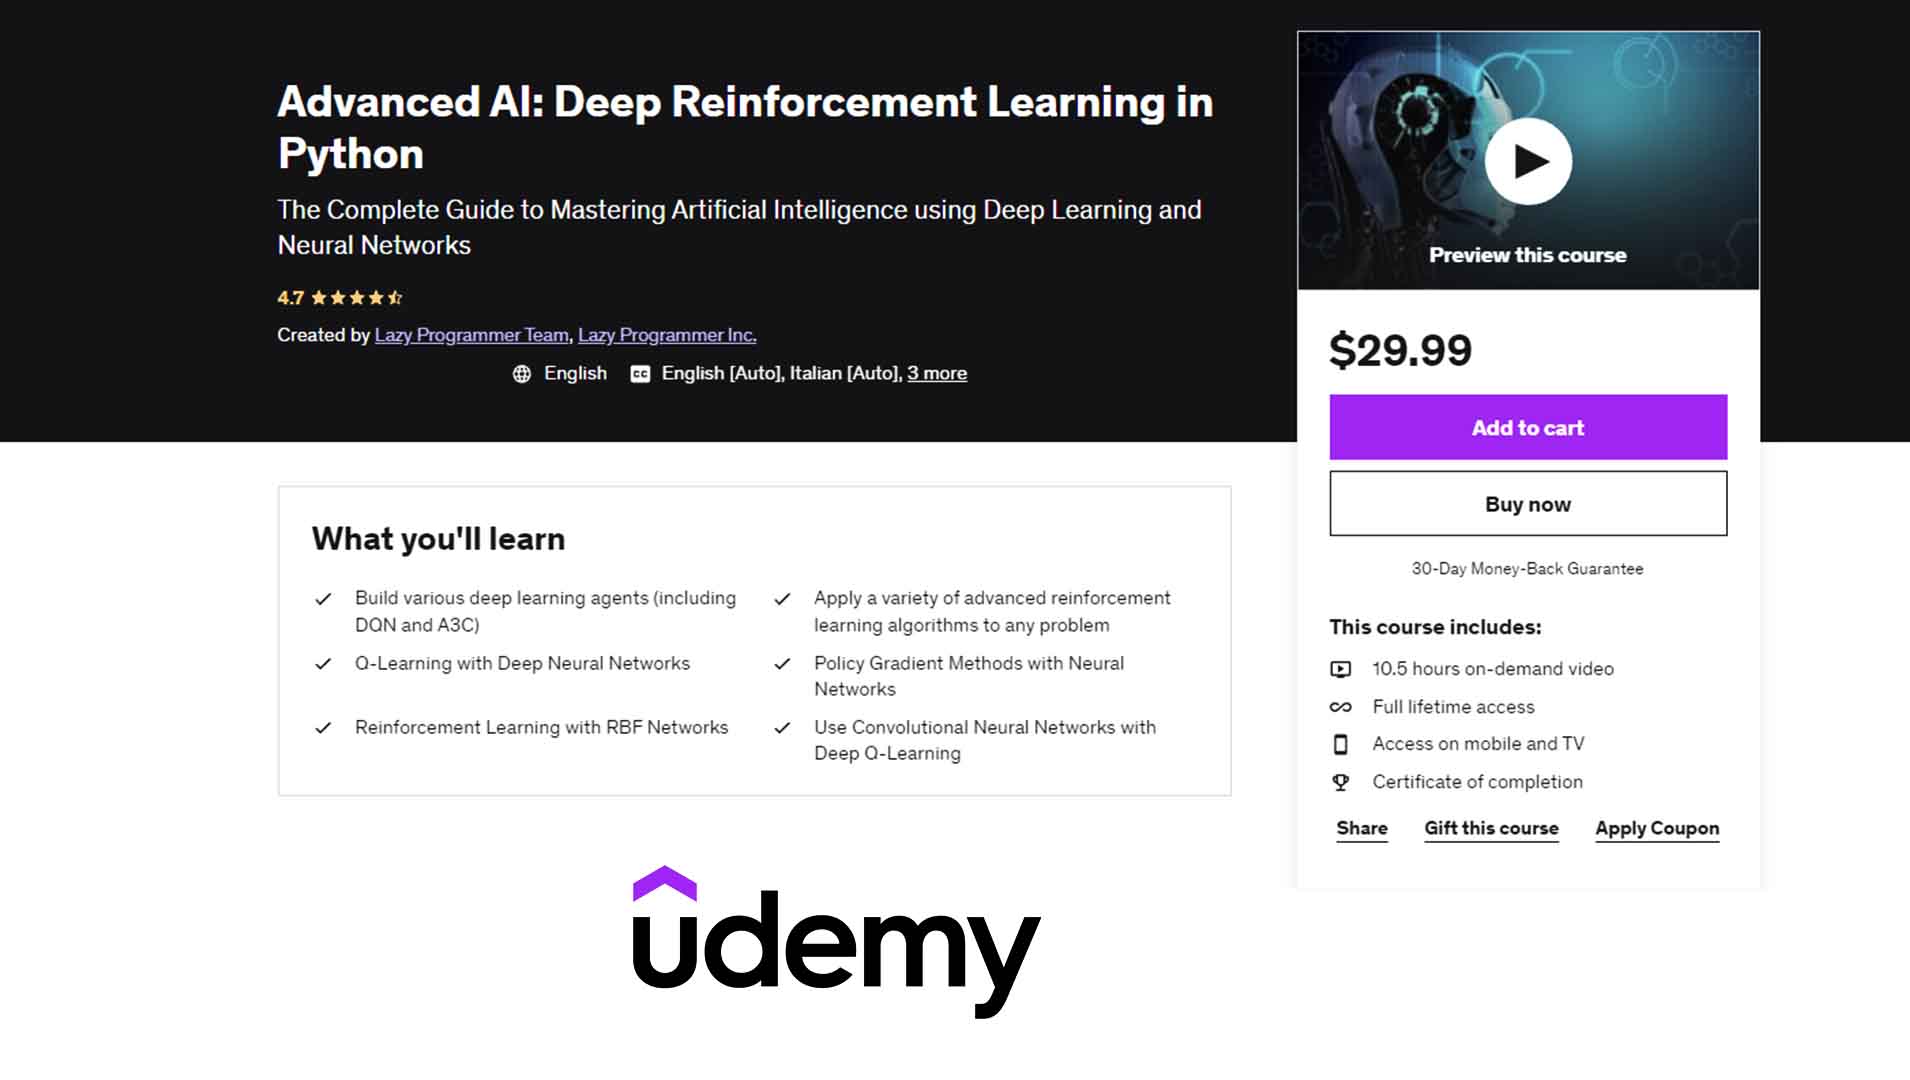 Advanced AI: Deep Reinforcement Learning in Python